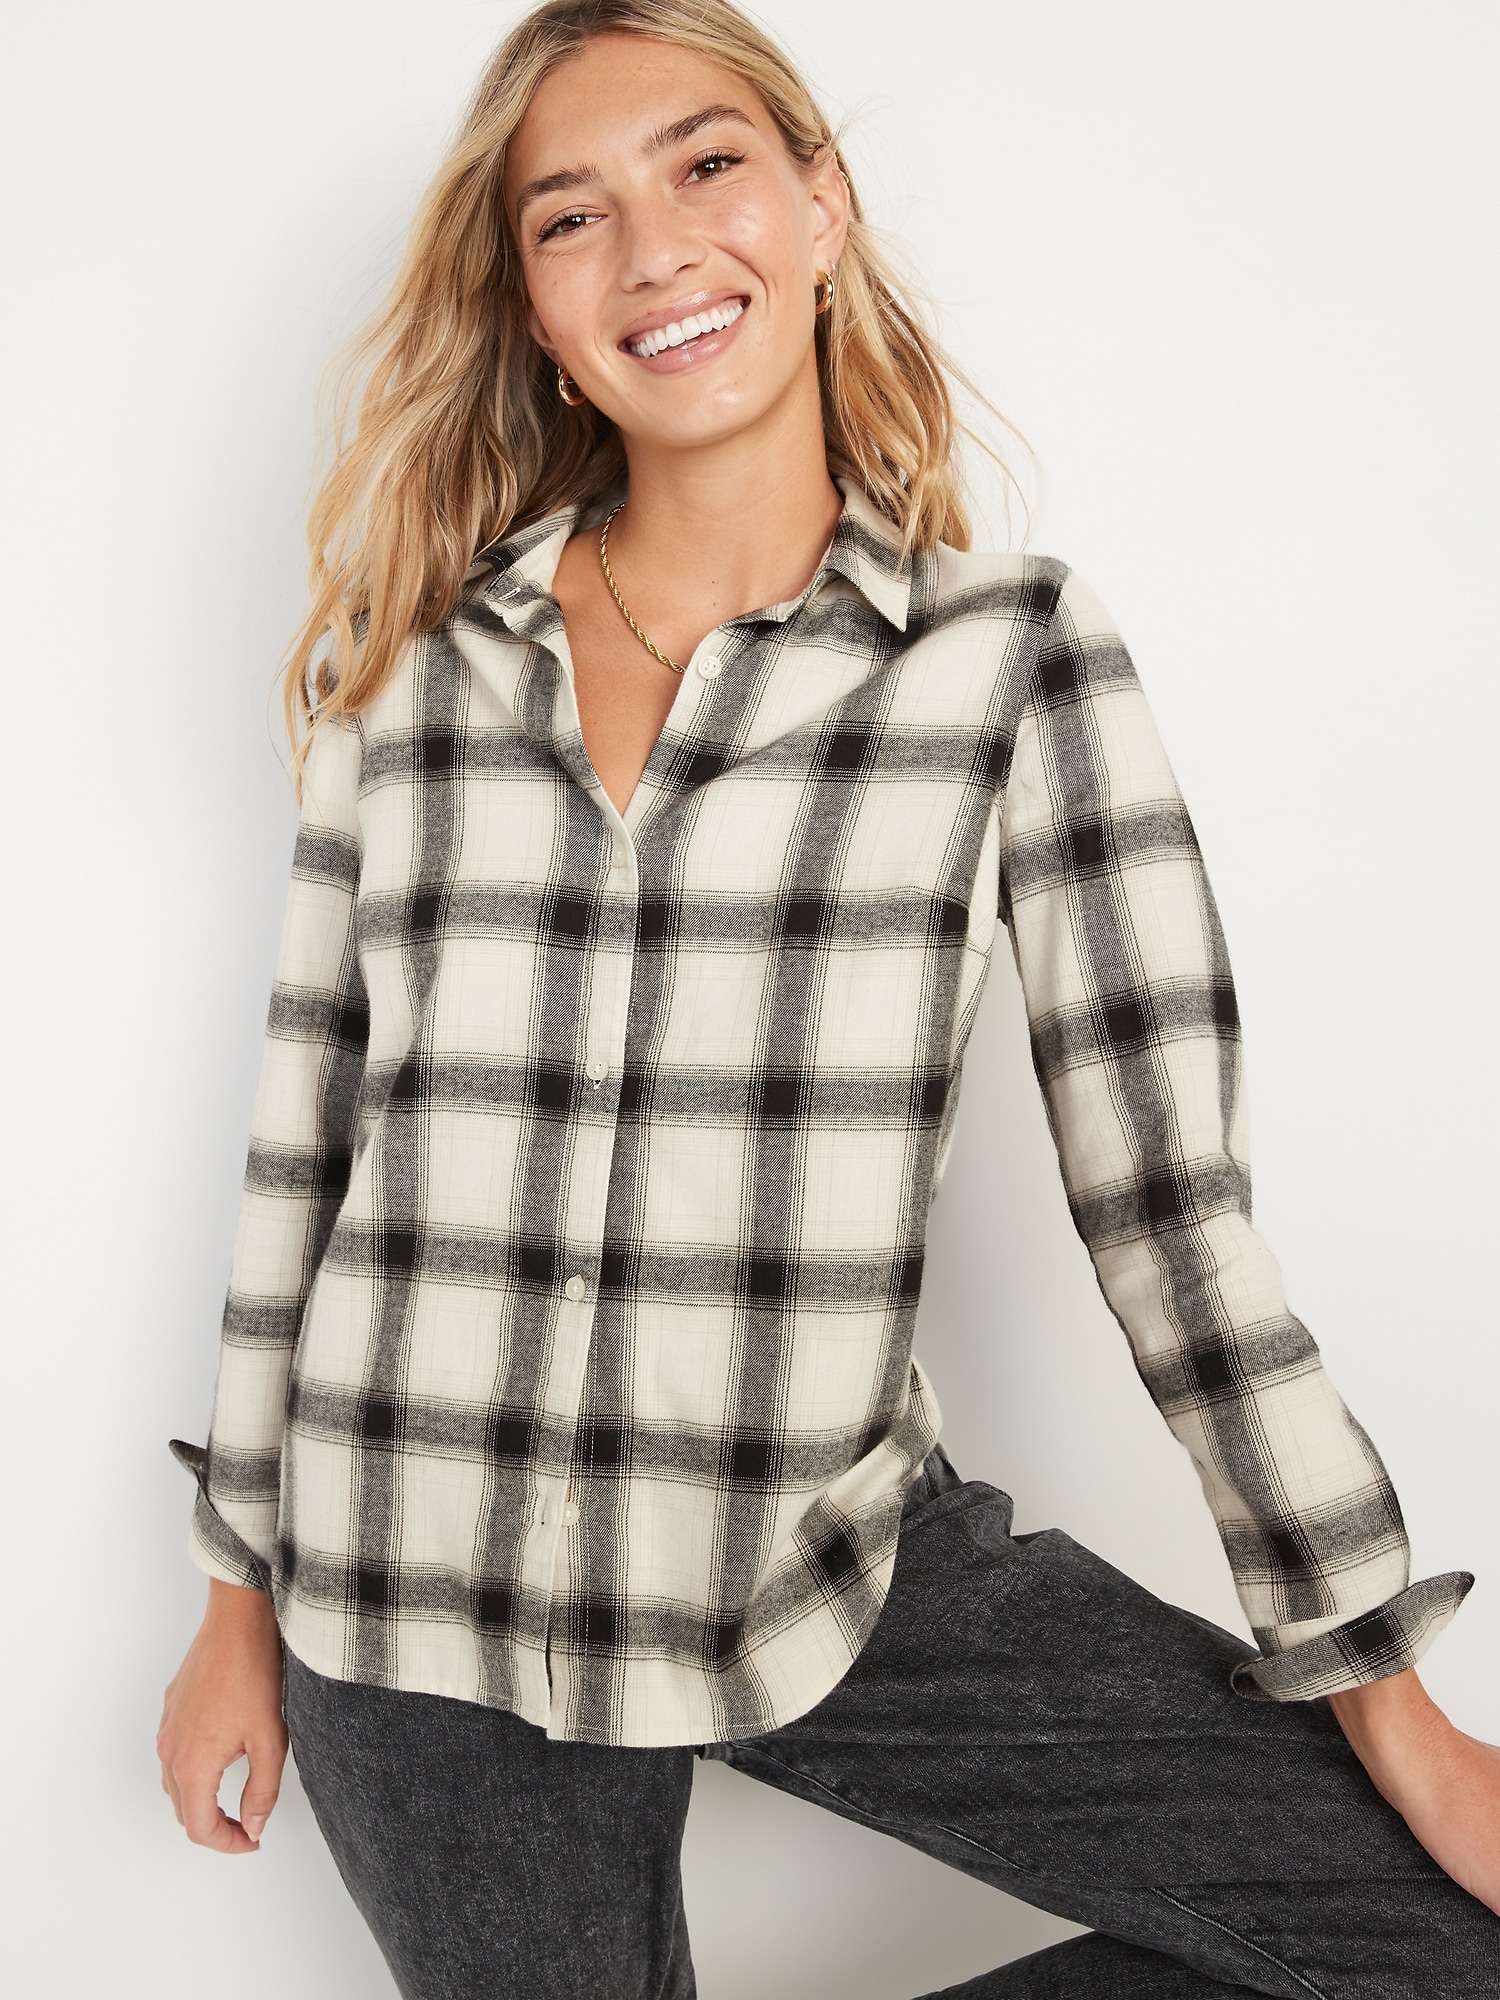 Long-Sleeve Plaid Flannel Shirt for Women | Old Navy